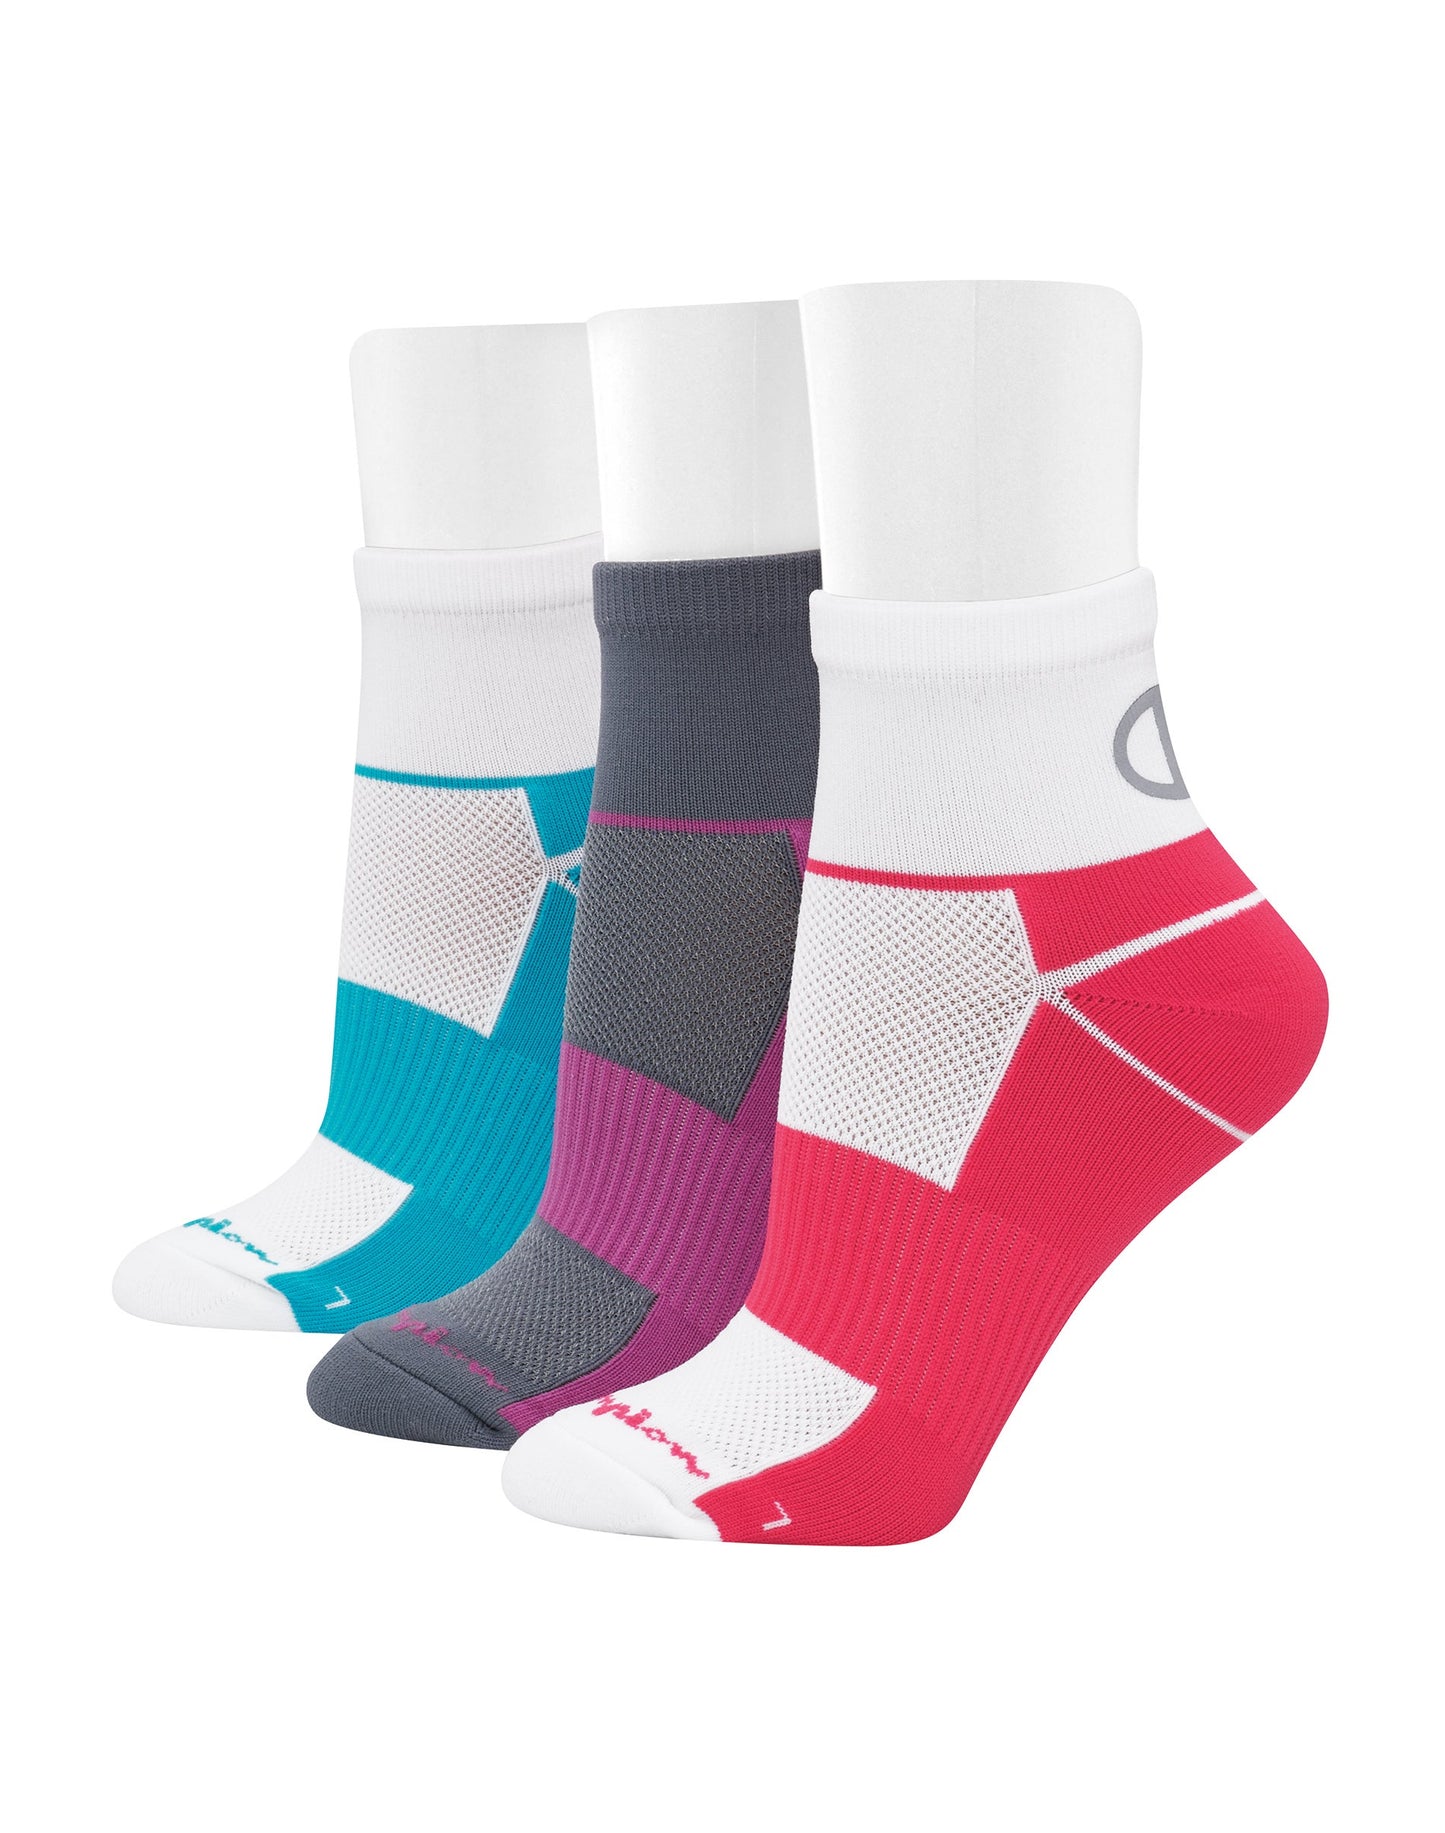 Champion Women's Sport Ankle Socks, 3-Pairs Assorted White/Grey 5-9